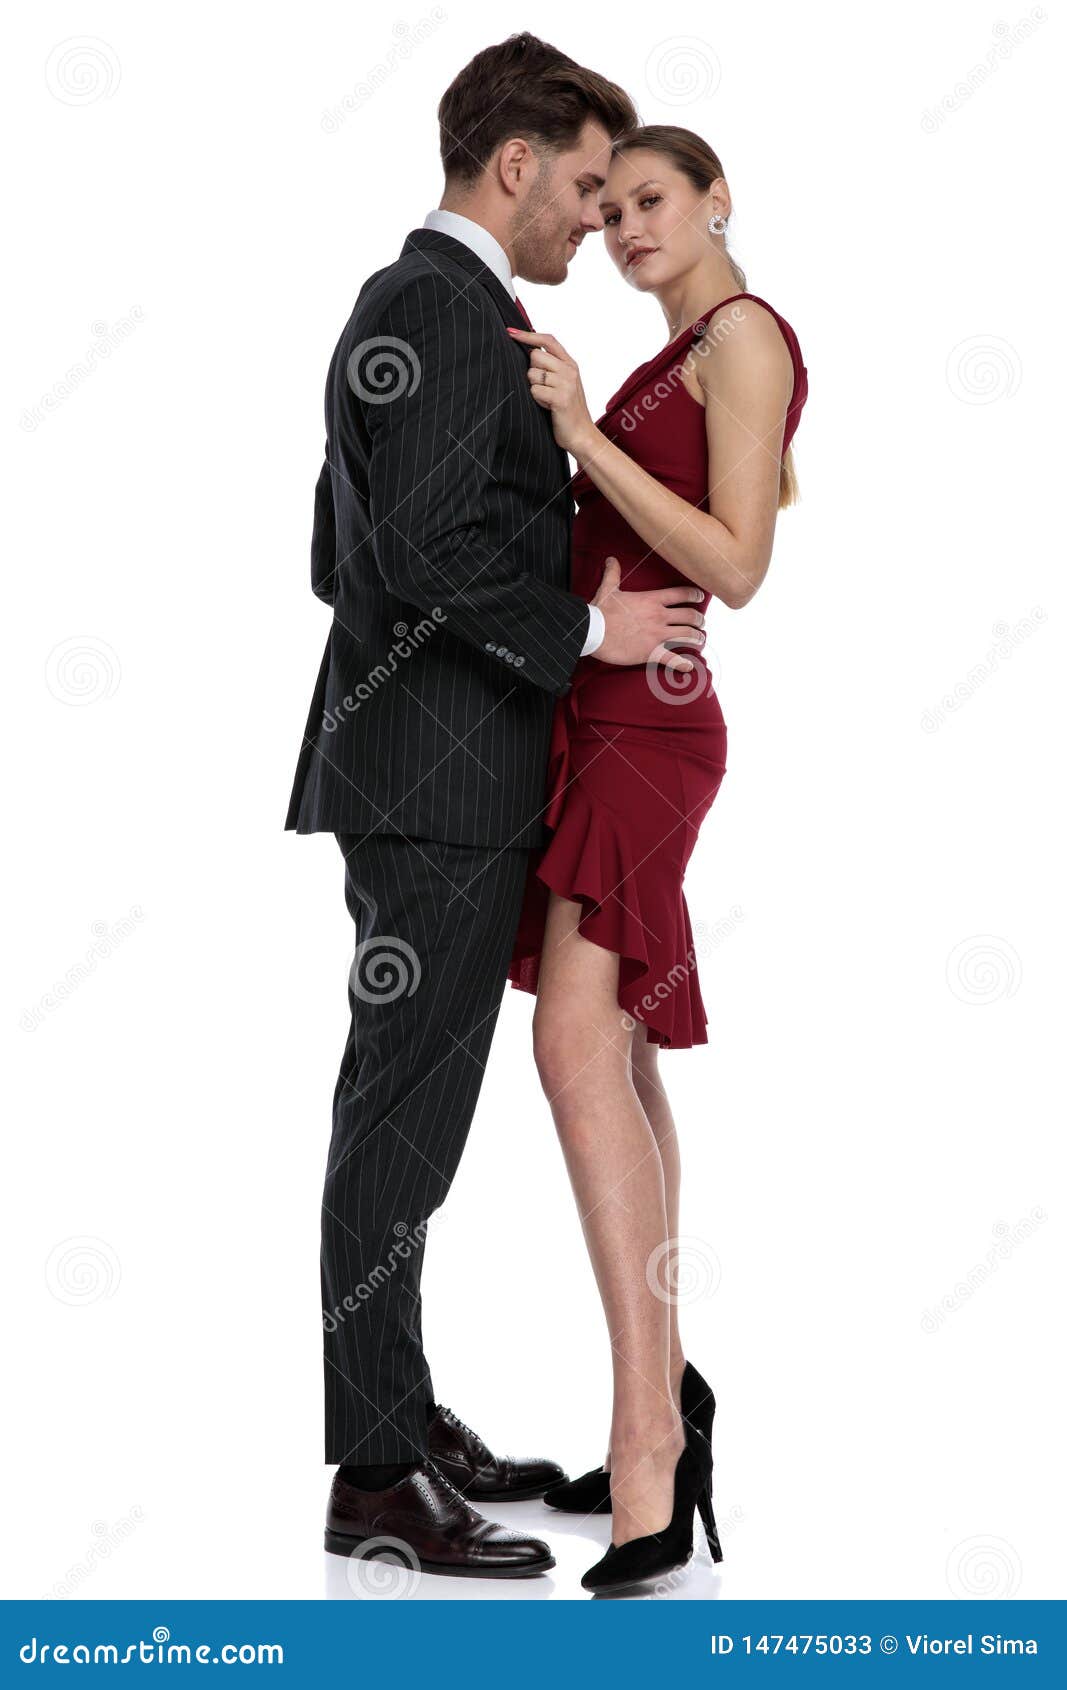 Romantic Young Guy Holding His Girlfriend by the Hips Stock Image ...